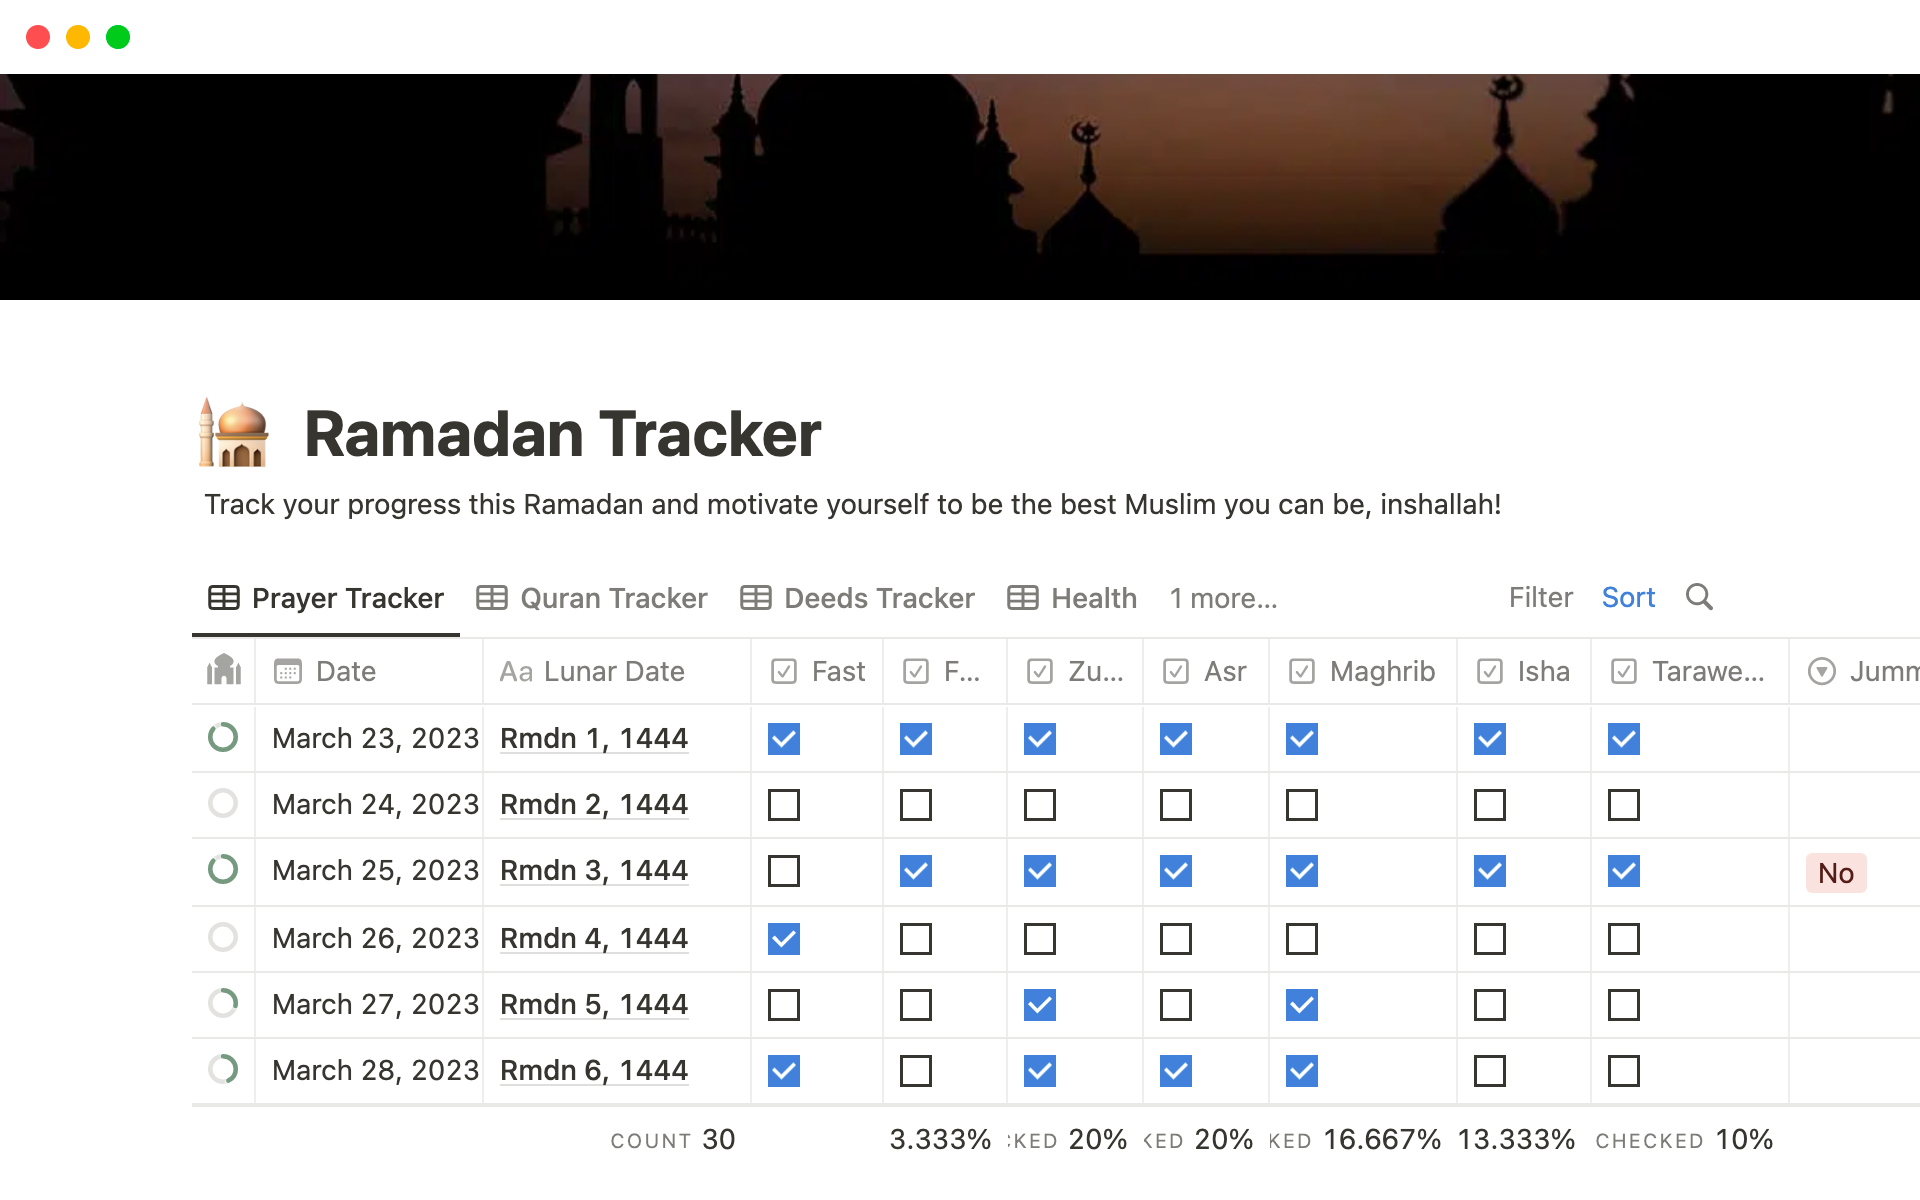 It helps Muslims observing Ramadan to track their progress and to keep accountable to their goals throughout the month